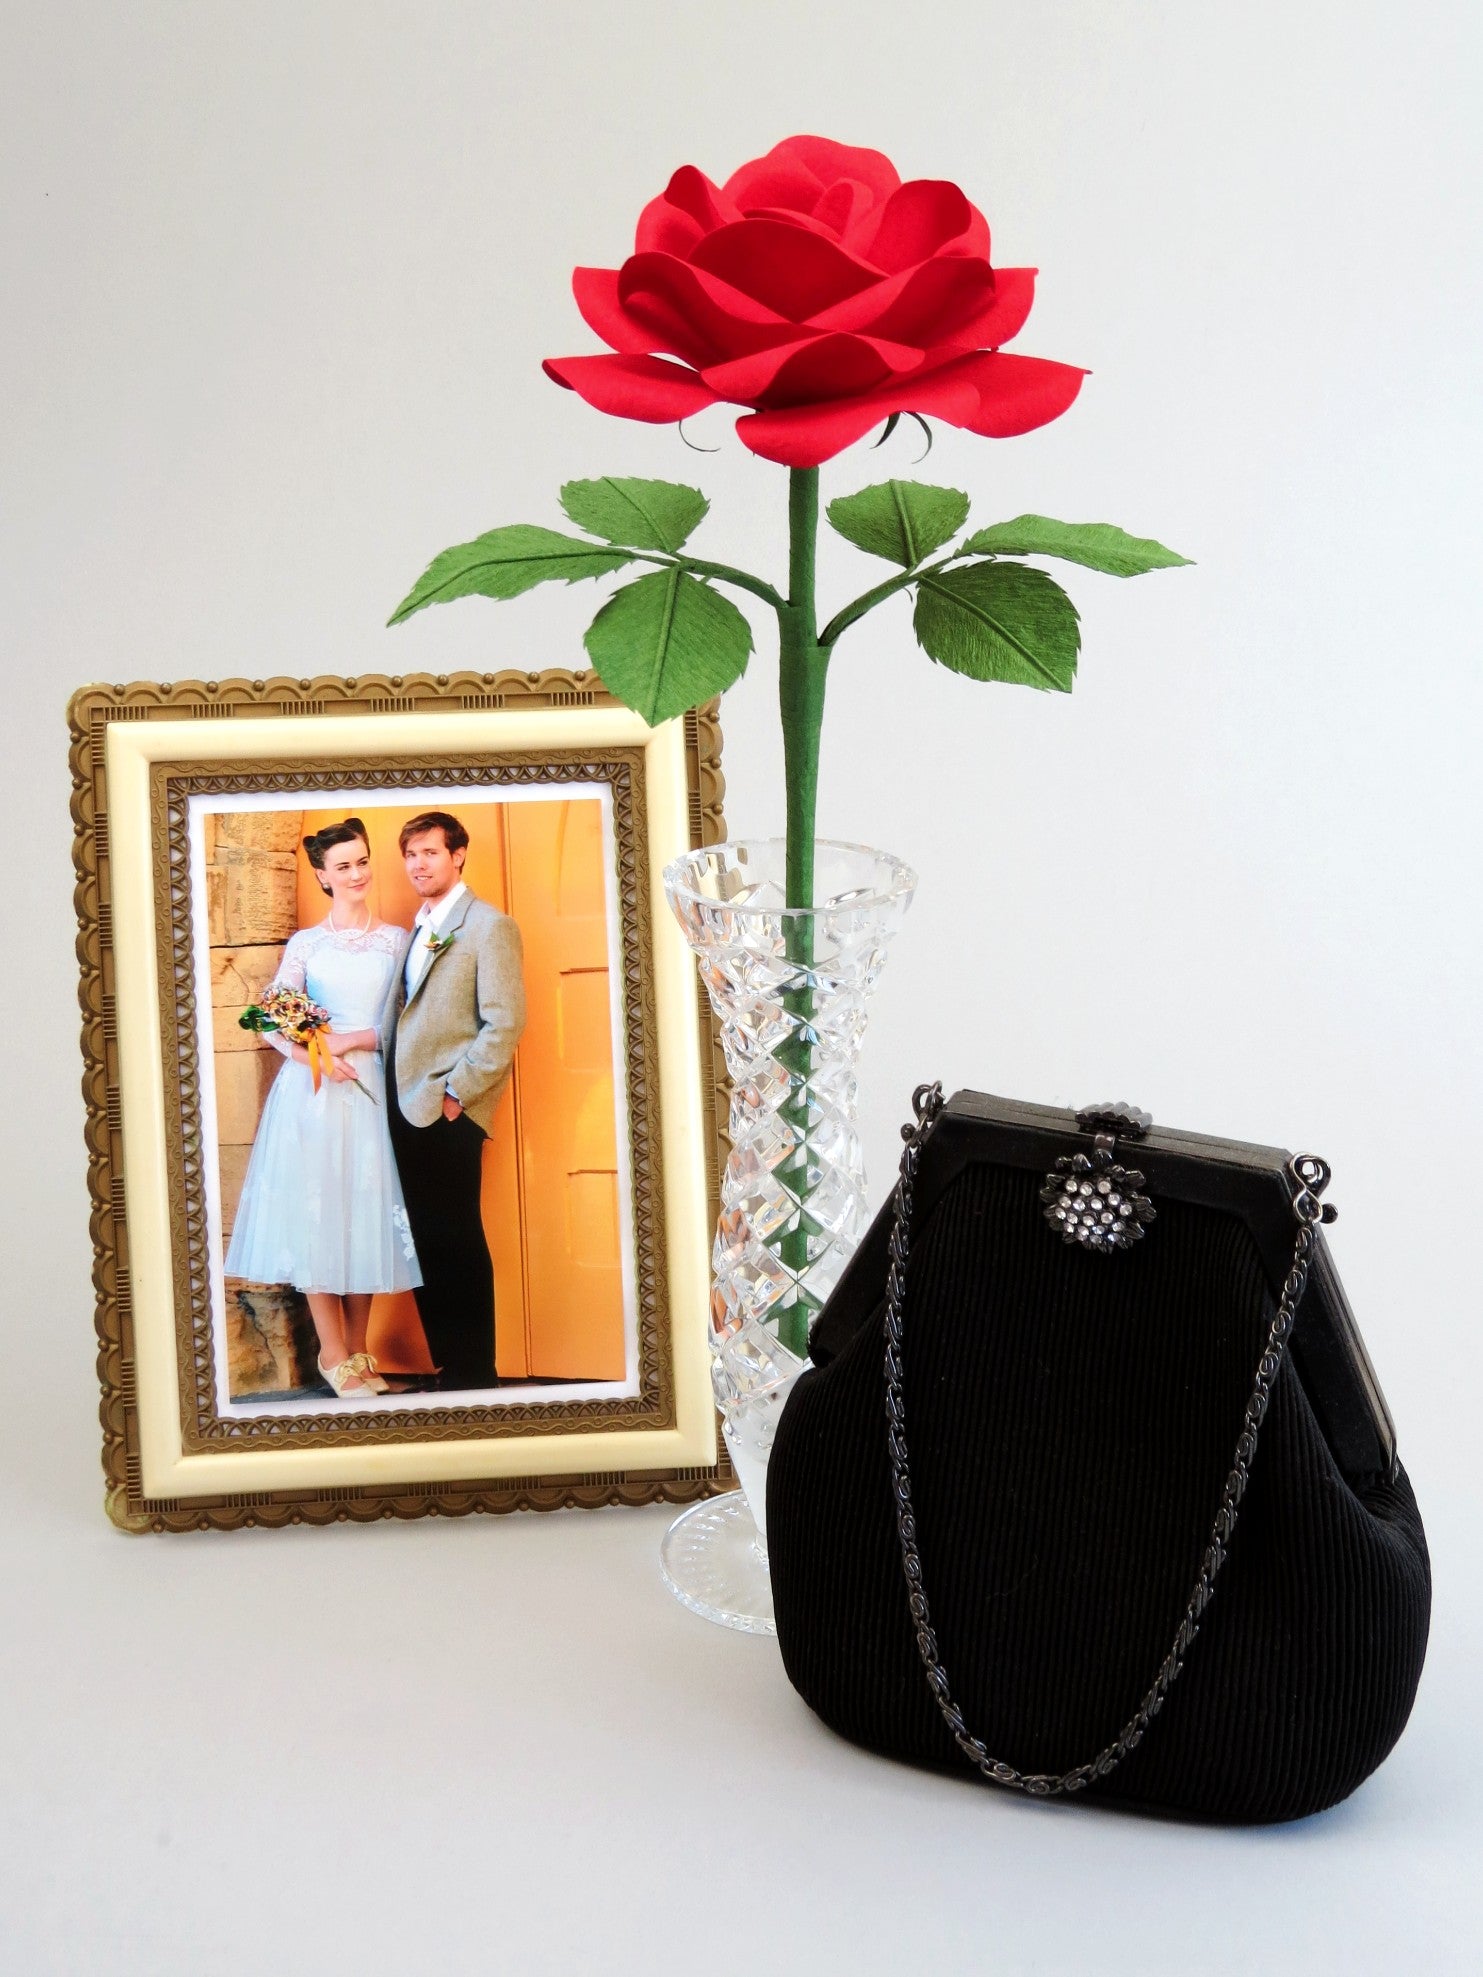 Red cotton paper rose with six green leaves standing in a slender glass vase with a framed wedding photo of a happy bride and groom to the left and a black vintage handbag with a diamante clutch and handing chain handle to the right of the vase